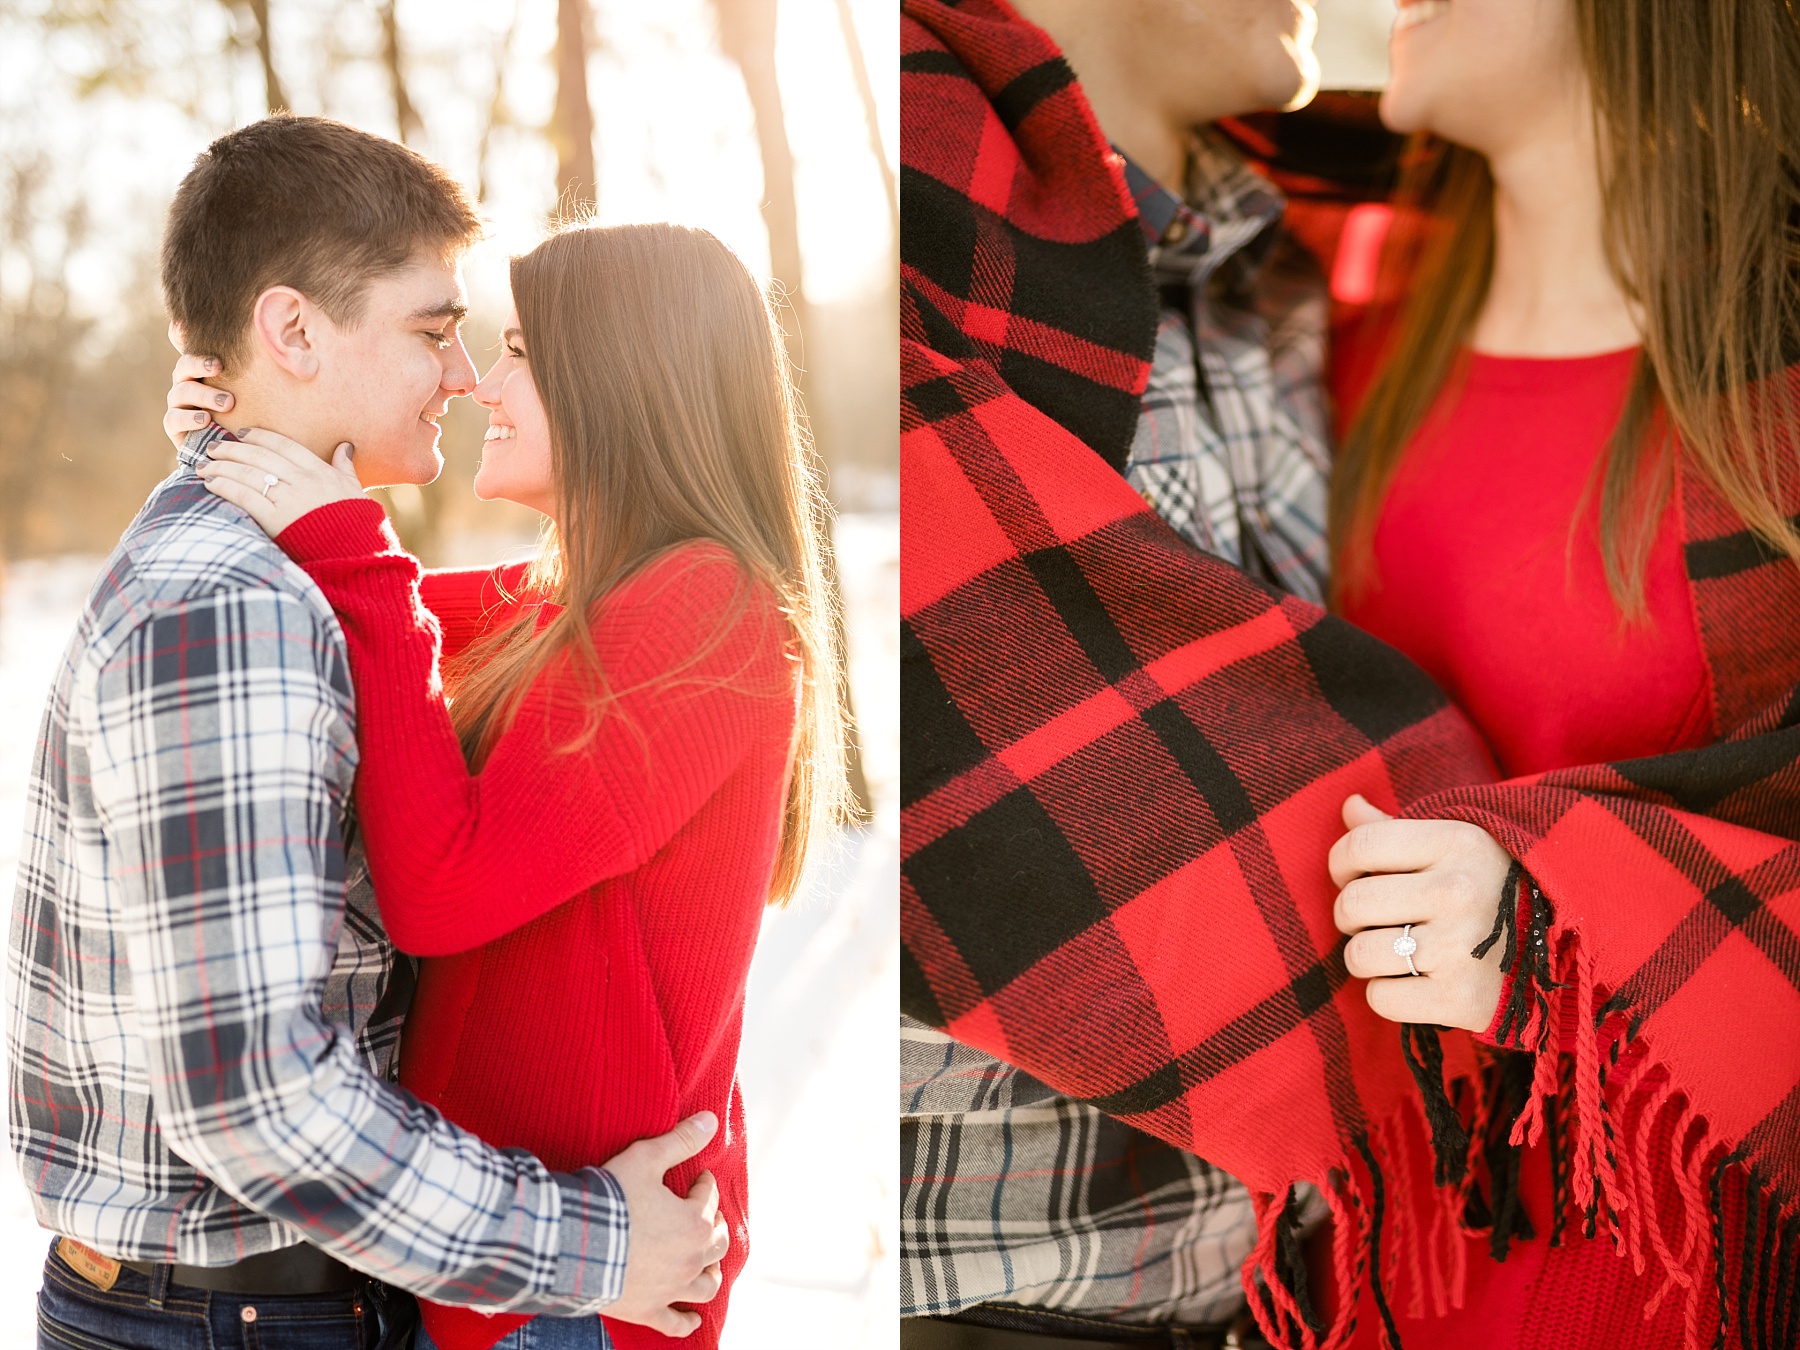 A warm January day made for cozy winter Chippewa Falls engagement pictures for Brittney & Quint.